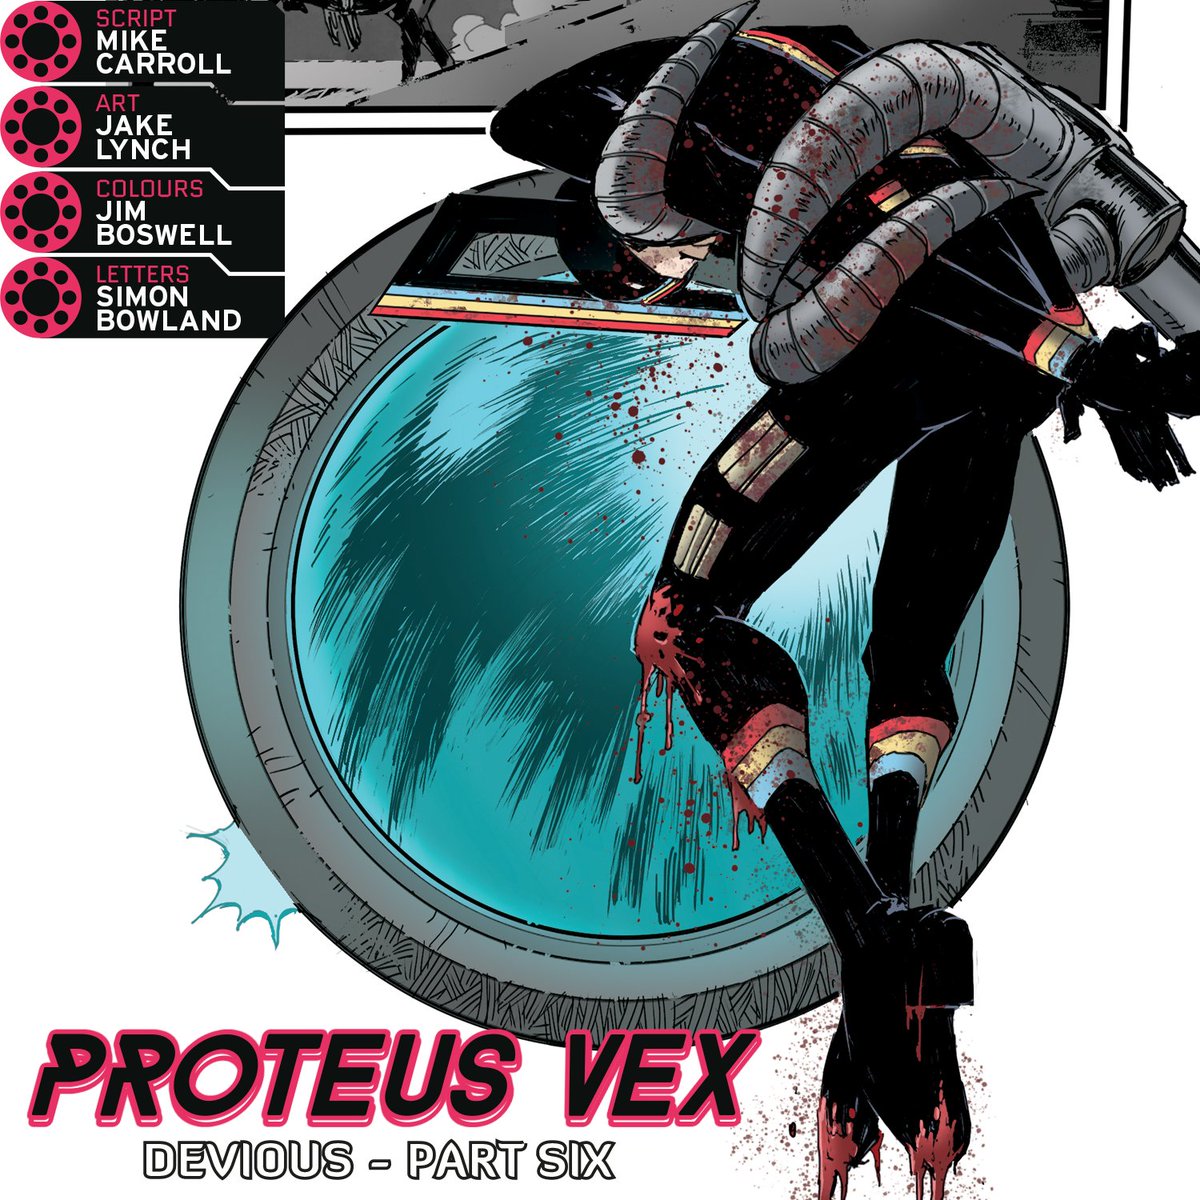 2000 AD Prog 2380 is out on 1st May - tomorrow! - featuring PROTEUS VEX: DEVIOUS, part six by: 📝 Script: @MikeOwenCarroll ✏️ Art: @artdroid_lynch 🎨 Colours: @jimboswellart 💬 Letters: @SimonBowland Subscribe now and get zarjaz free gifts ➡️ bit.ly/2Ws04uc